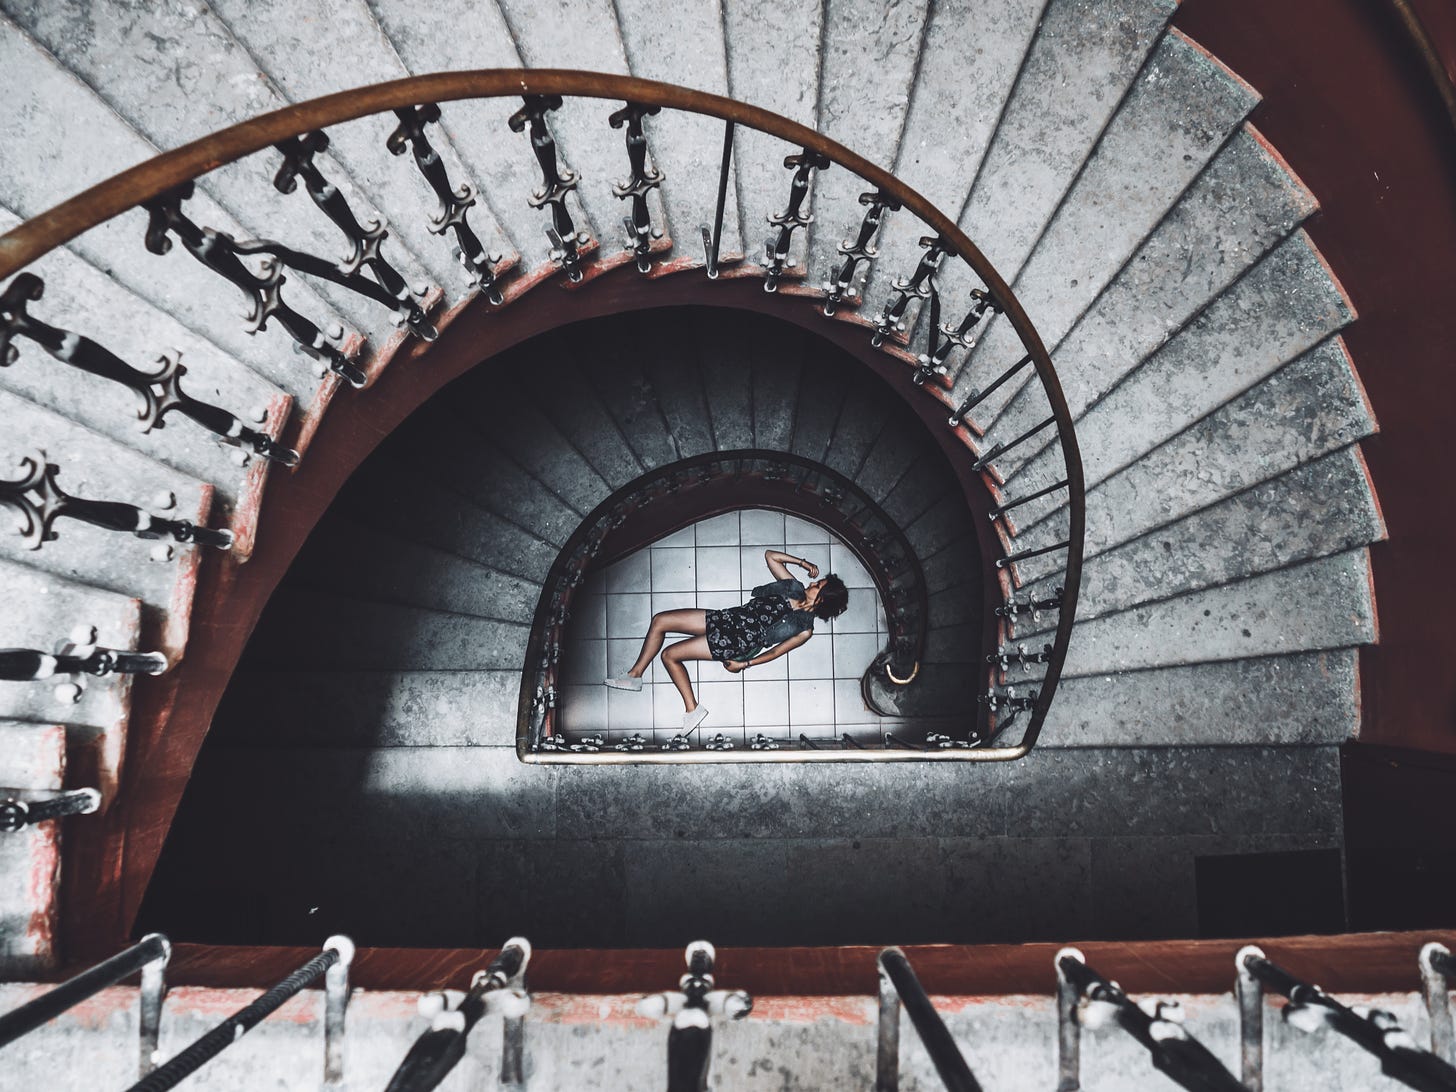 aerial view of a stone spiral staircase with a woman lying on the ground at the bottom of the stairs